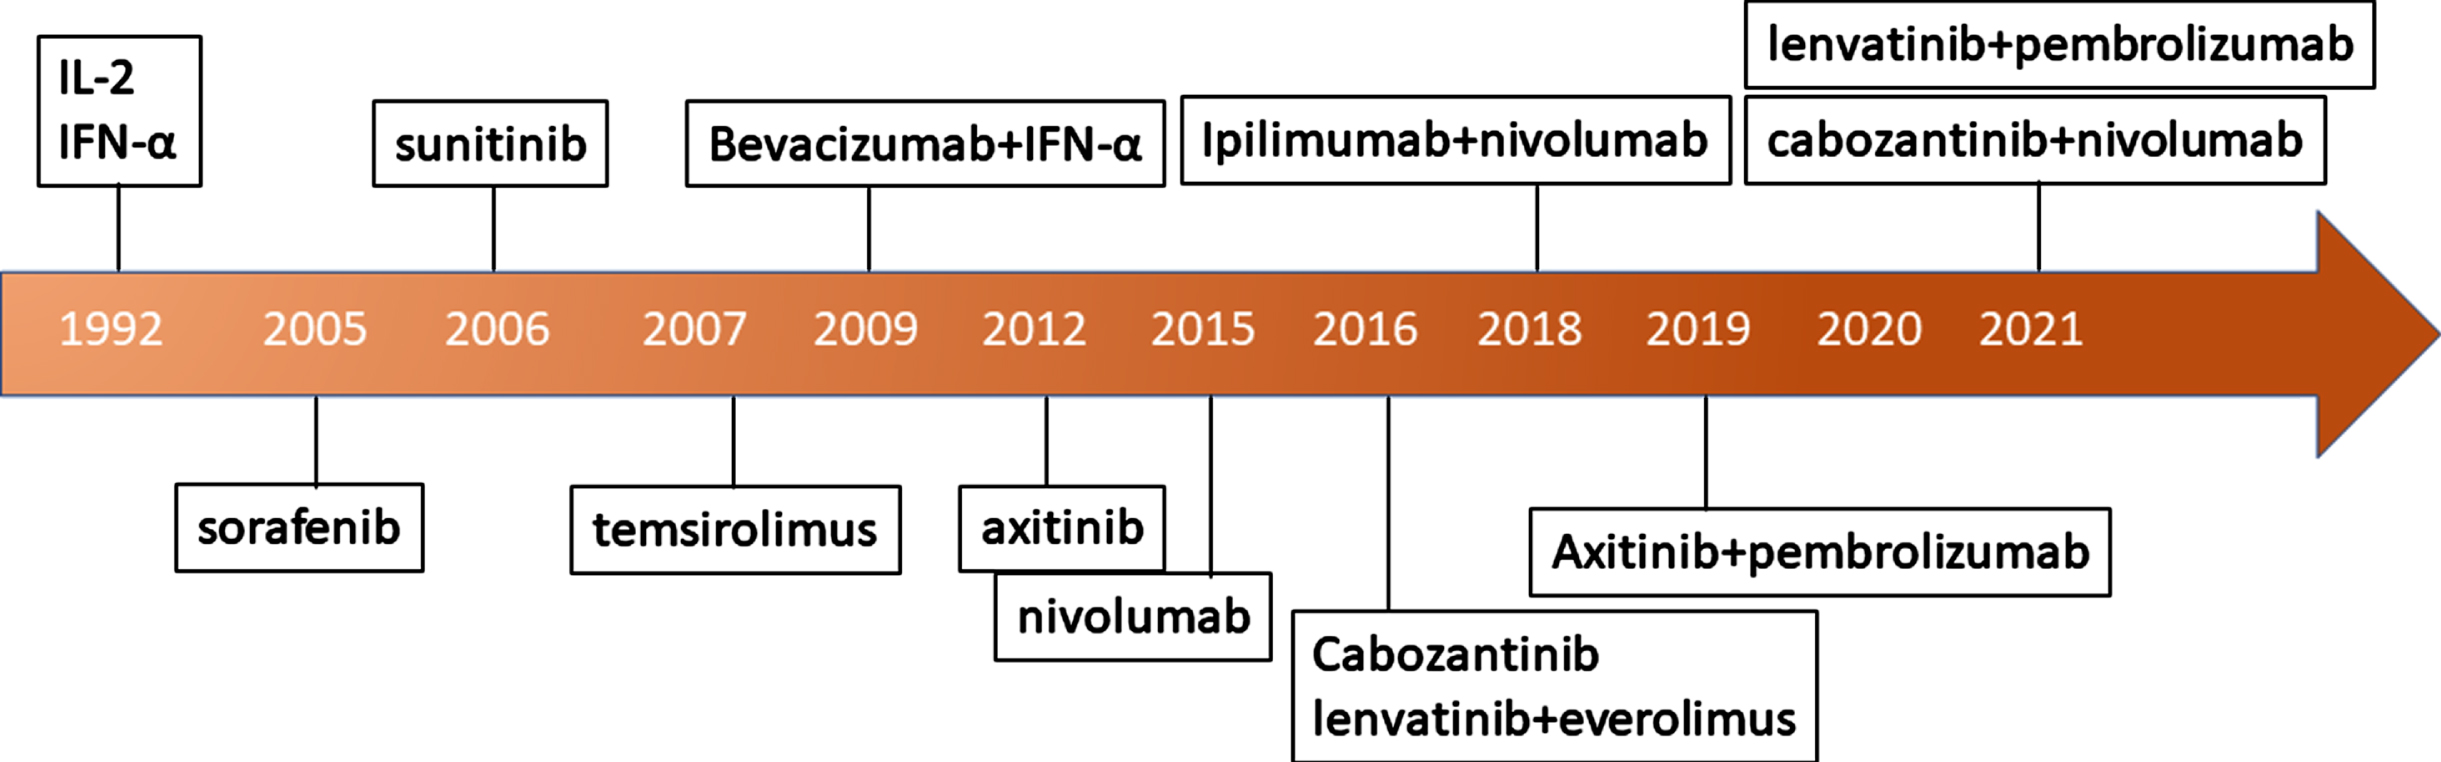 Evolution of renal cell carcinoma treatments.